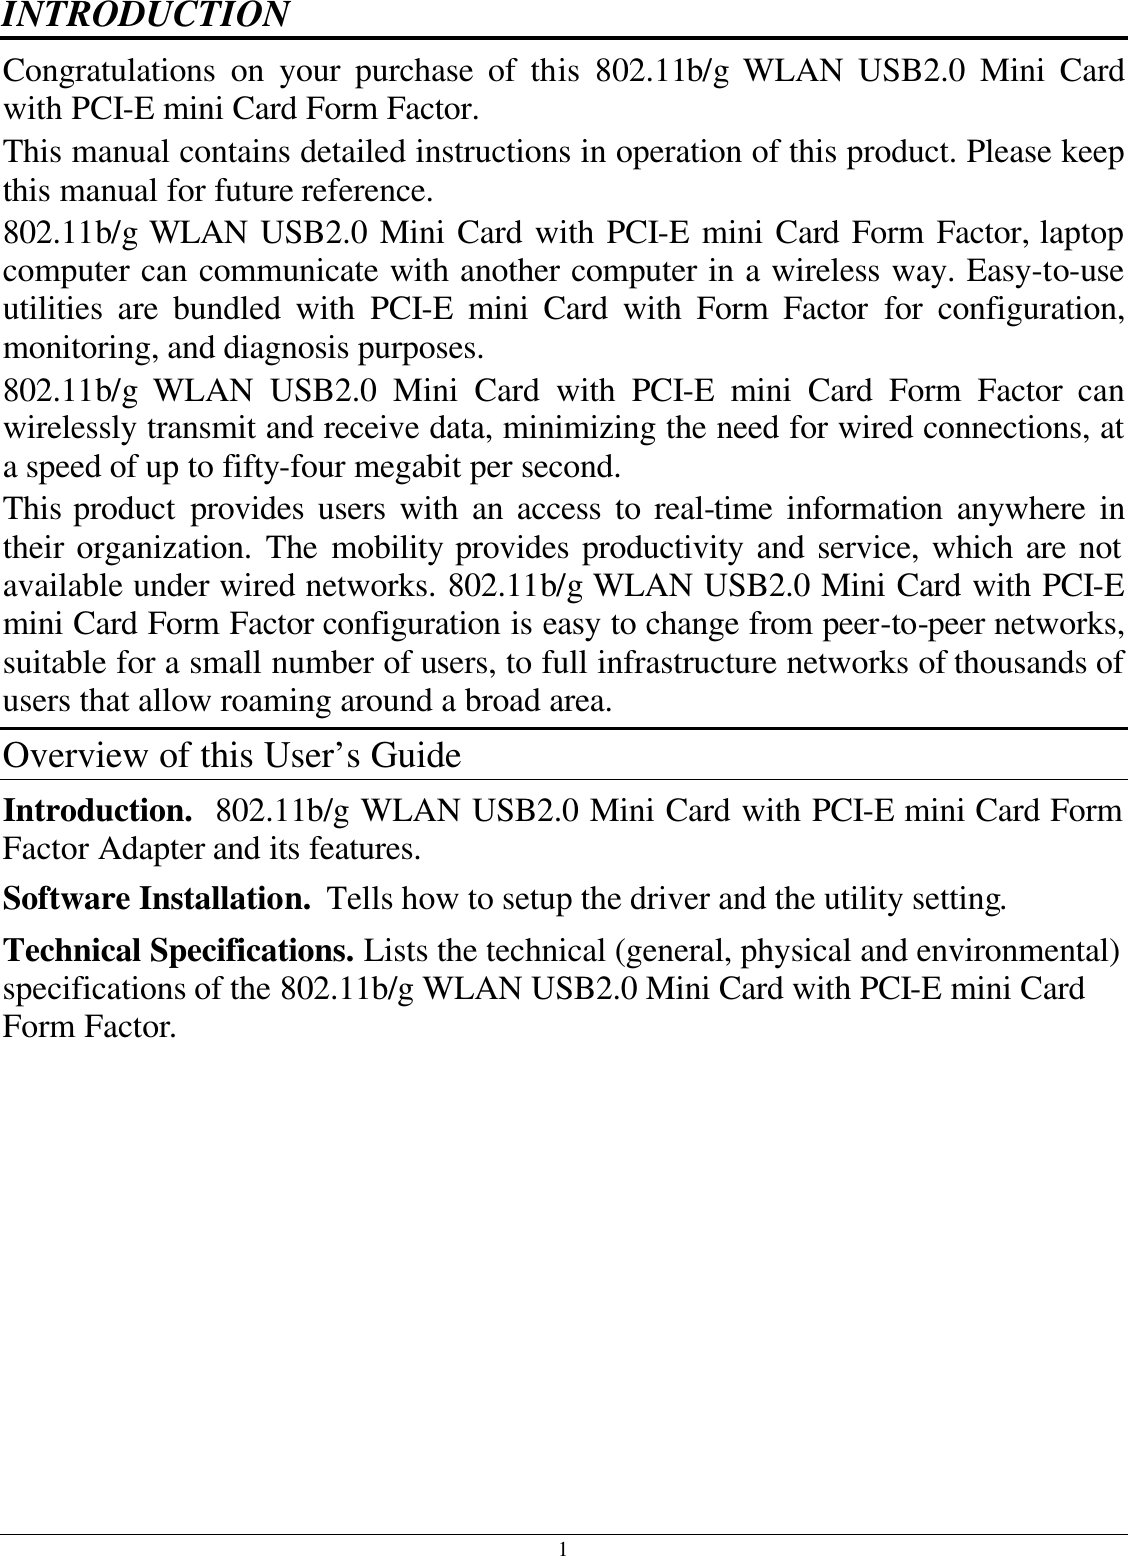 1 INTRODUCTION Congratulations on your purchase of this 802.11b/g  WLAN USB2.0 Mini Card with PCI-E mini Card Form Factor. This manual contains detailed instructions in operation of this product. Please keep this manual for future reference. 802.11b/g  WLAN USB2.0 Mini Card with PCI-E mini Card Form Factor, laptop computer can communicate with another computer in a wireless way. Easy-to-use utilities are bundled with PCI-E mini Card with Form Factor for configuration, monitoring, and diagnosis purposes.  802.11b/g  WLAN USB2.0 Mini Card with PCI-E mini Card Form Factor can wirelessly transmit and receive data, minimizing the need for wired connections, at a speed of up to fifty-four megabit per second. This product provides users with an access to real-time information anywhere in their organization. The mobility provides productivity and service, which are not available under wired networks. 802.11b/g WLAN USB2.0 Mini Card with PCI-E mini Card Form Factor configuration is easy to change from peer-to-peer networks, suitable for a small number of users, to full infrastructure networks of thousands of users that allow roaming around a broad area.  Overview of this User’s Guide Introduction.  802.11b/g WLAN USB2.0 Mini Card with PCI-E mini Card Form Factor Adapter and its features. Software Installation.  Tells how to setup the driver and the utility setting. Technical Specifications. Lists the technical (general, physical and environmental) specifications of the 802.11b/g WLAN USB2.0 Mini Card with PCI-E mini Card Form Factor. 